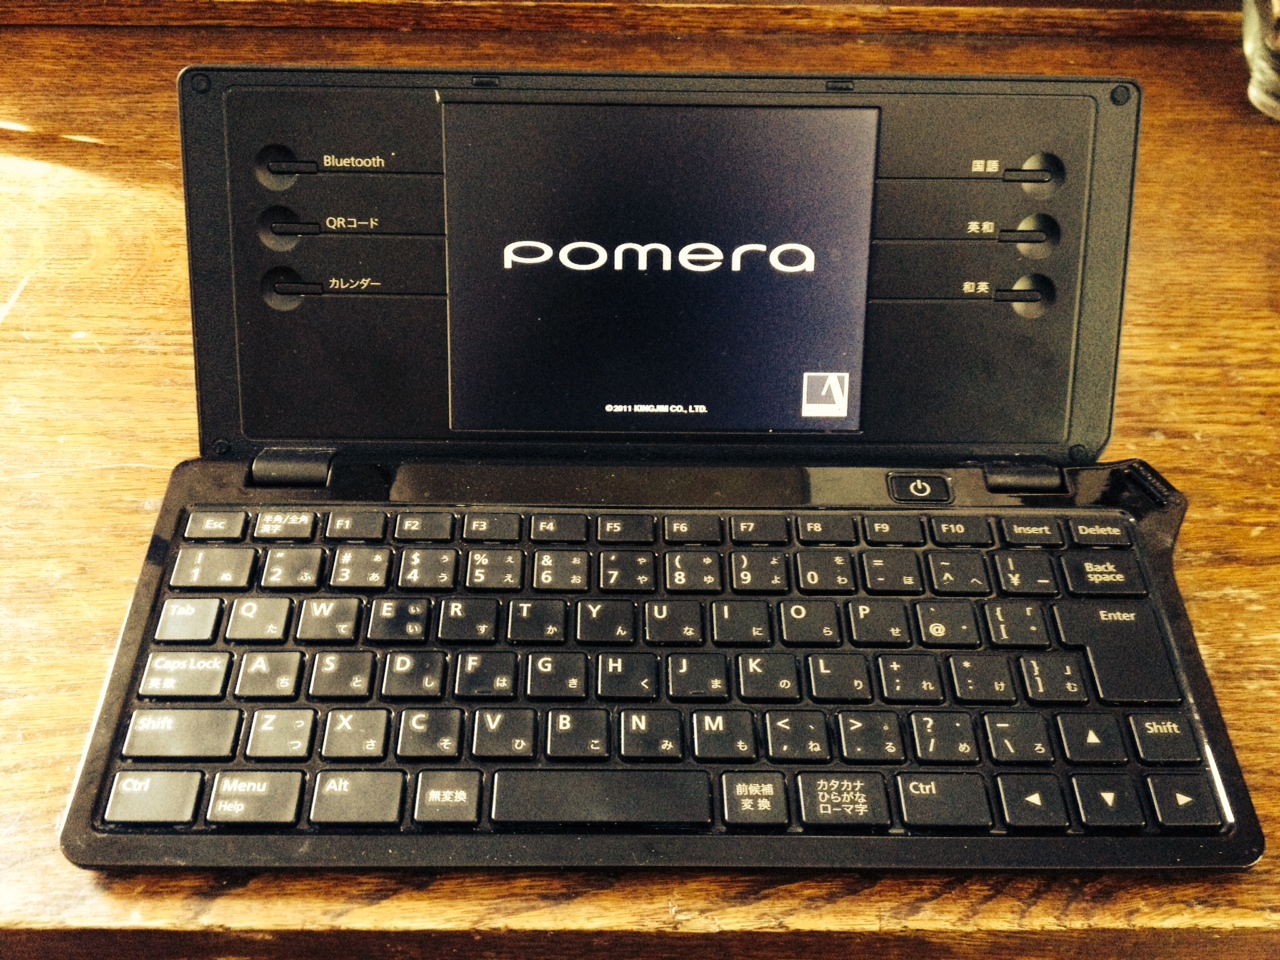 The Pomera DM100 - A Distraction Free Note Taking Device From Japan